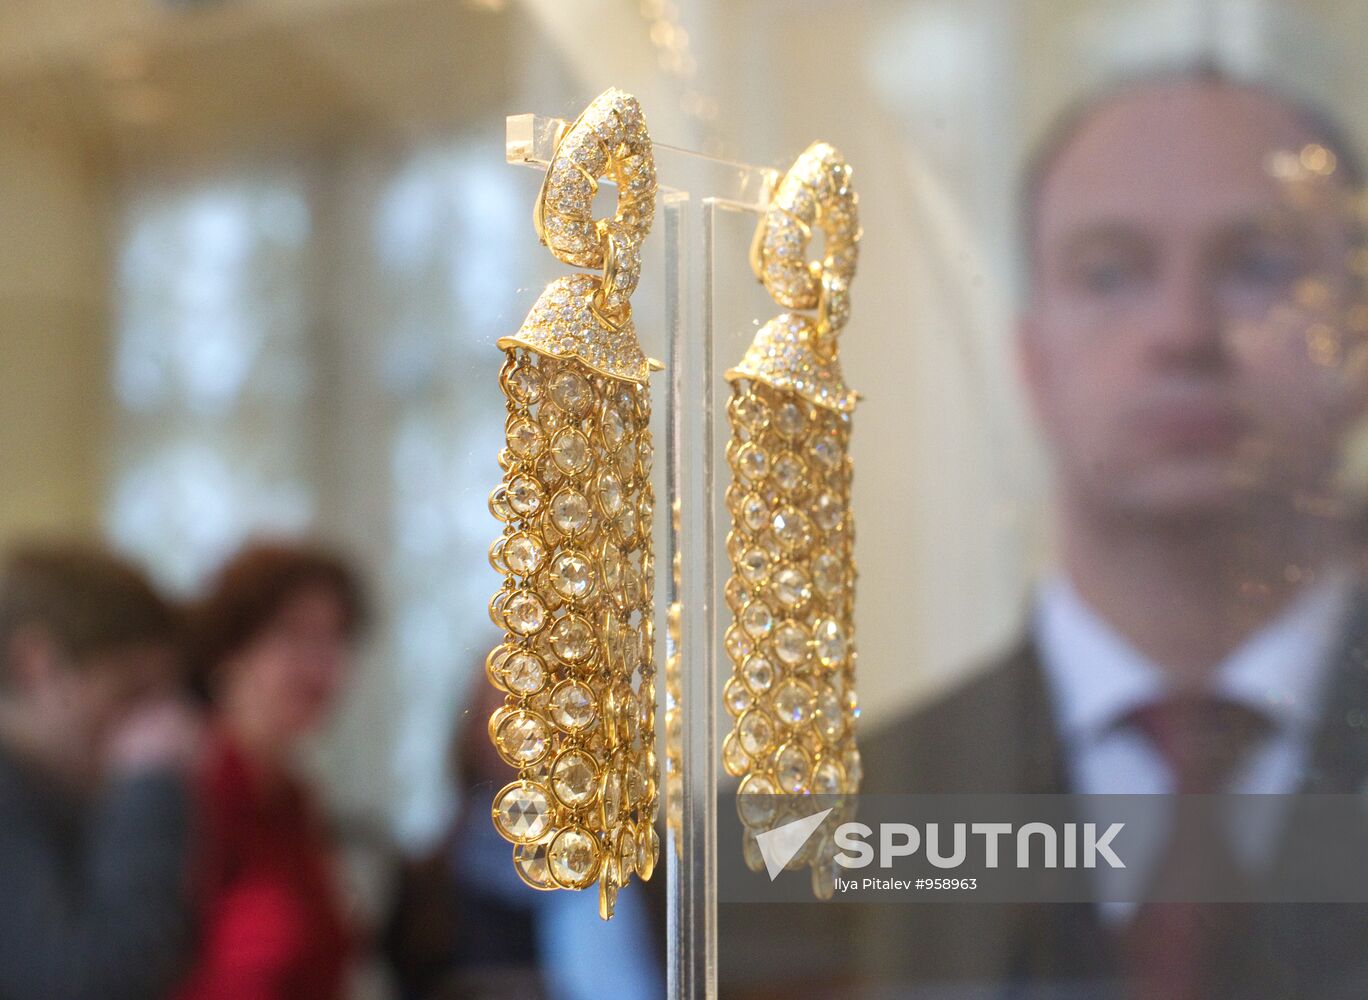 Exhibition of Elizabeth Taylor's clothing and jewelry collection